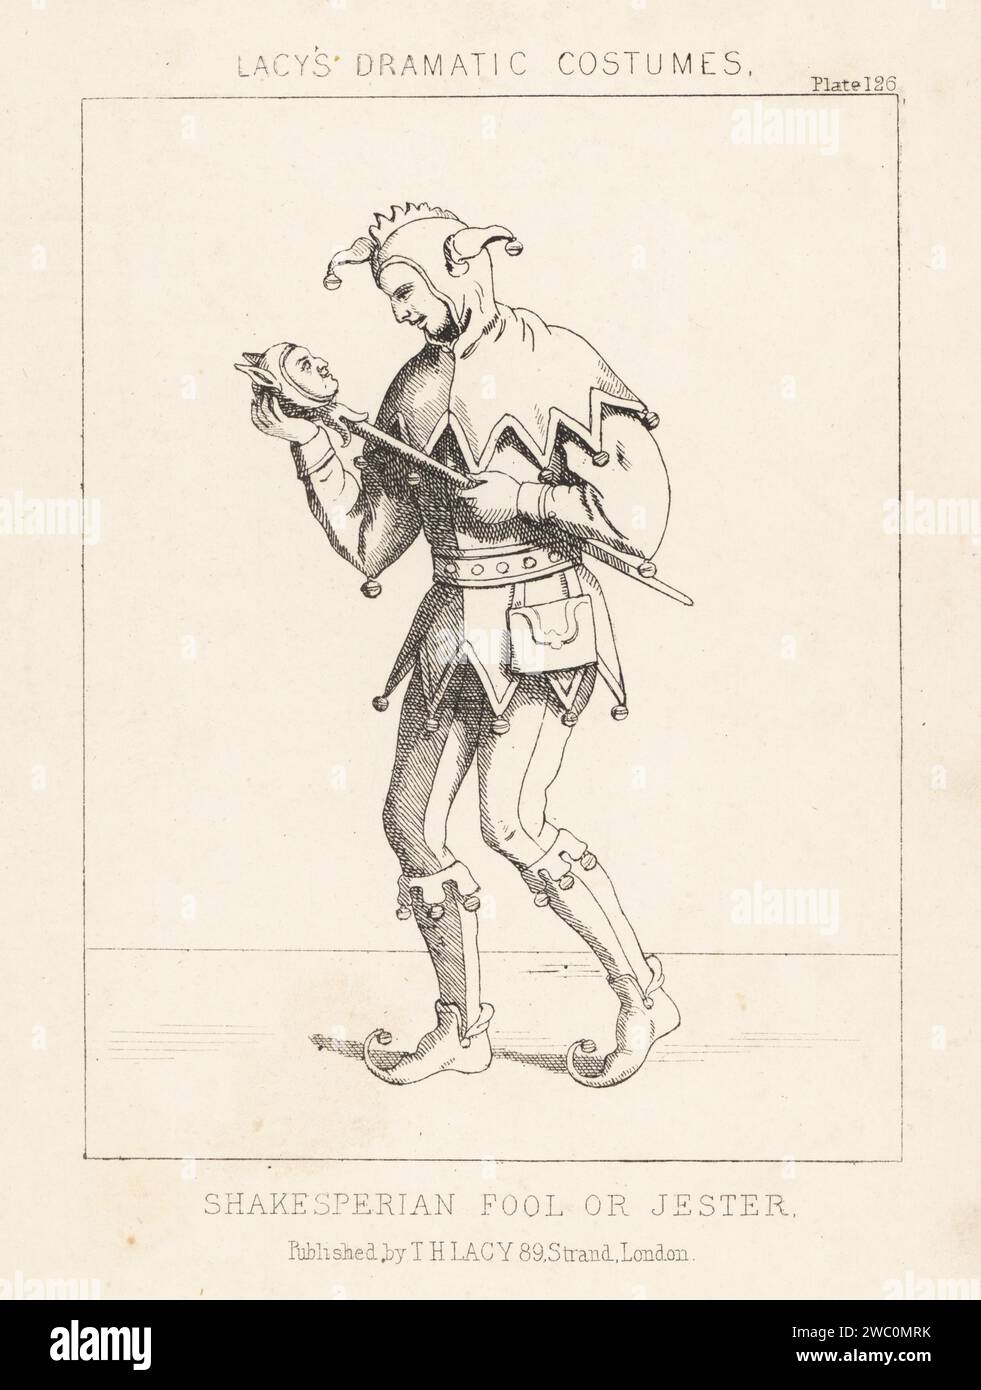 Shakespearian fool or jester with marotte, 16th century. Man in dagged chaperon or hood, dagged doublet, hose and shoes, all in motley or parti-colour with bells. Lithograph from Thomas Hailes Lacy's Male Costumes, Historical, National and Dramatic in 200 Plates, London, 1865. Lacy (1809-1873) was a British actor, playwright, theatrical manager and publisher. Stock Photo